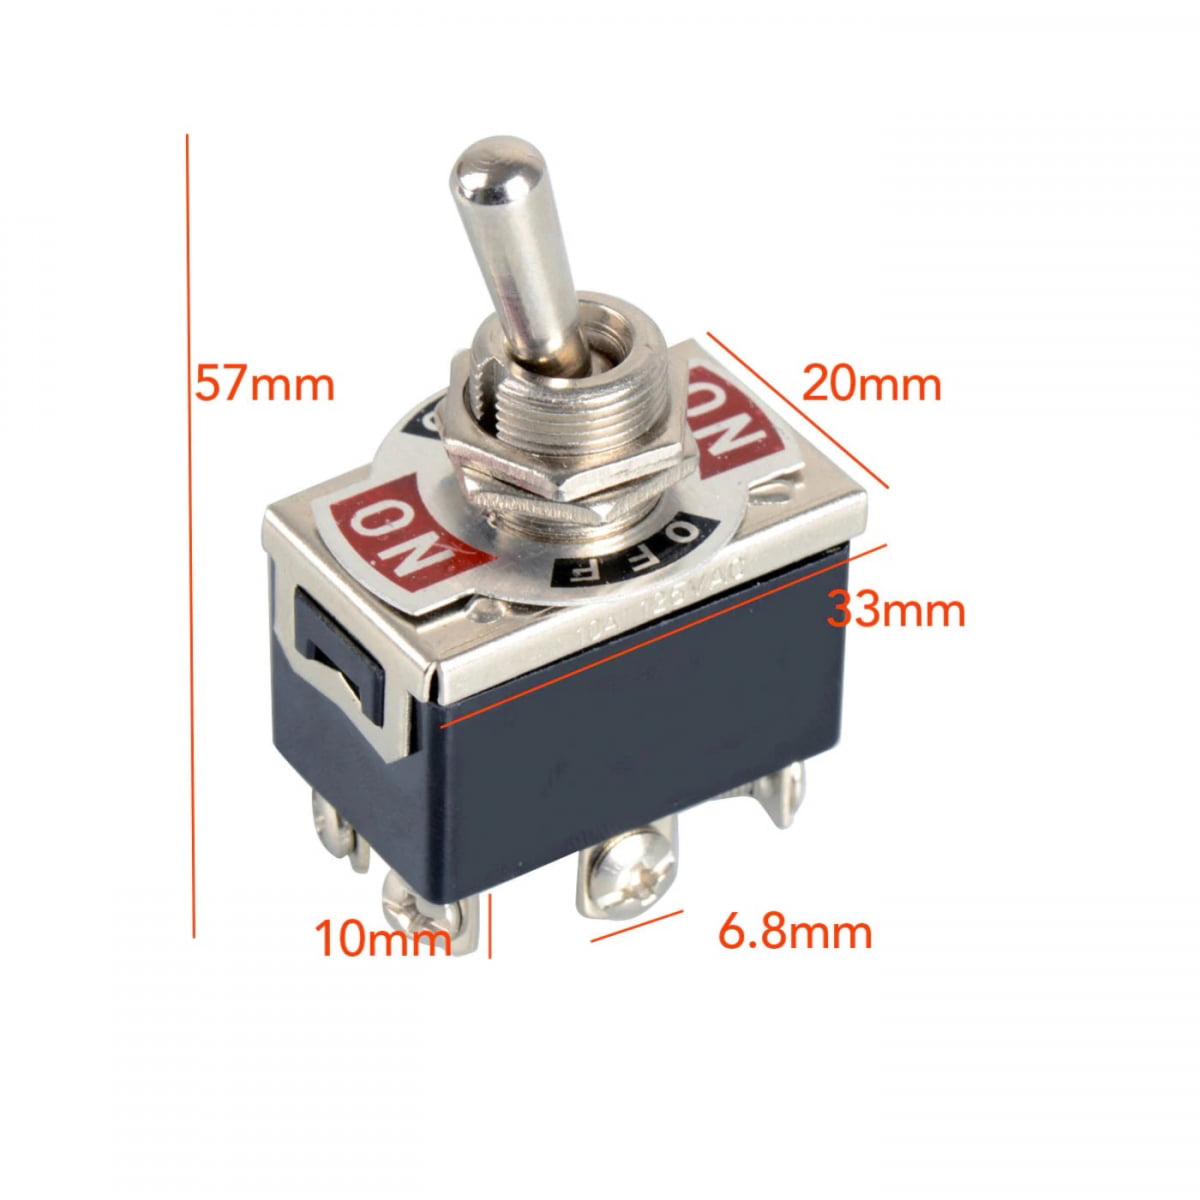 ON 2 Pieces Momentary Mini Toggle Switch -OFF- 6 pin 12vdc 220ac 1/4  A5 ON 